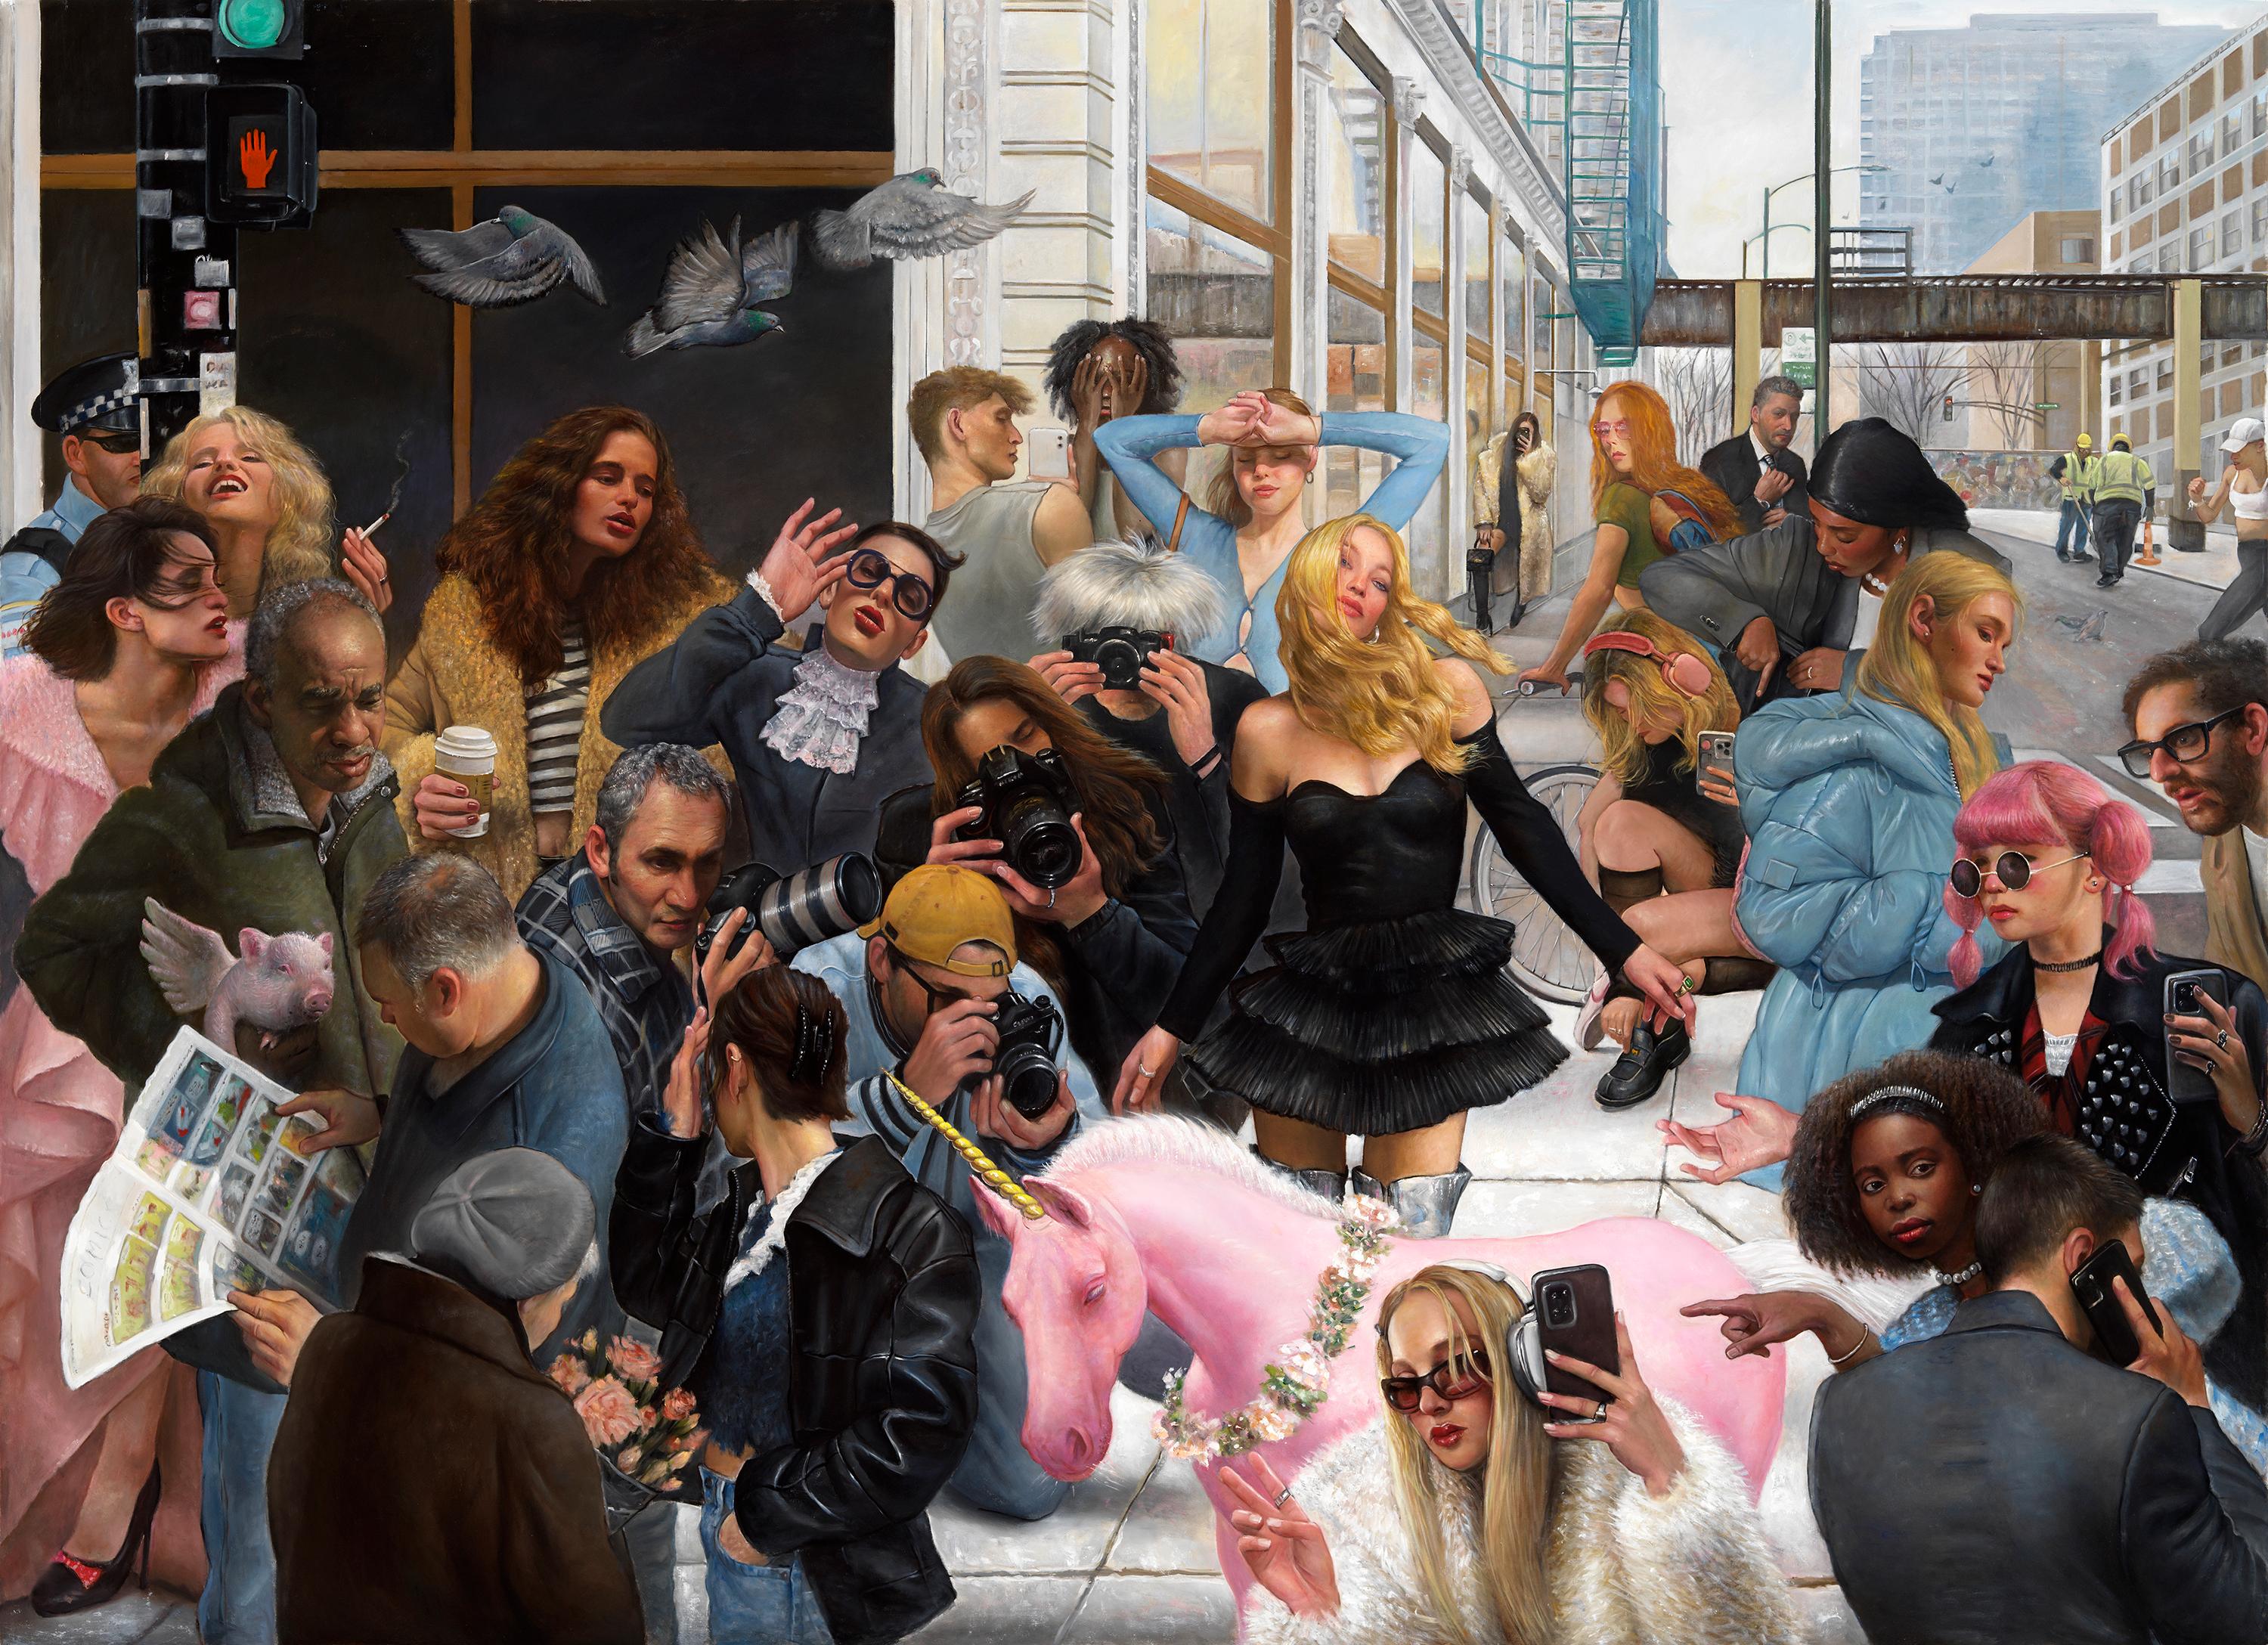 Bruno Surdo Animal Painting - A Selfie, A Pink Unicorn, Paparazzi! What Does It Take To Get Noticed?  